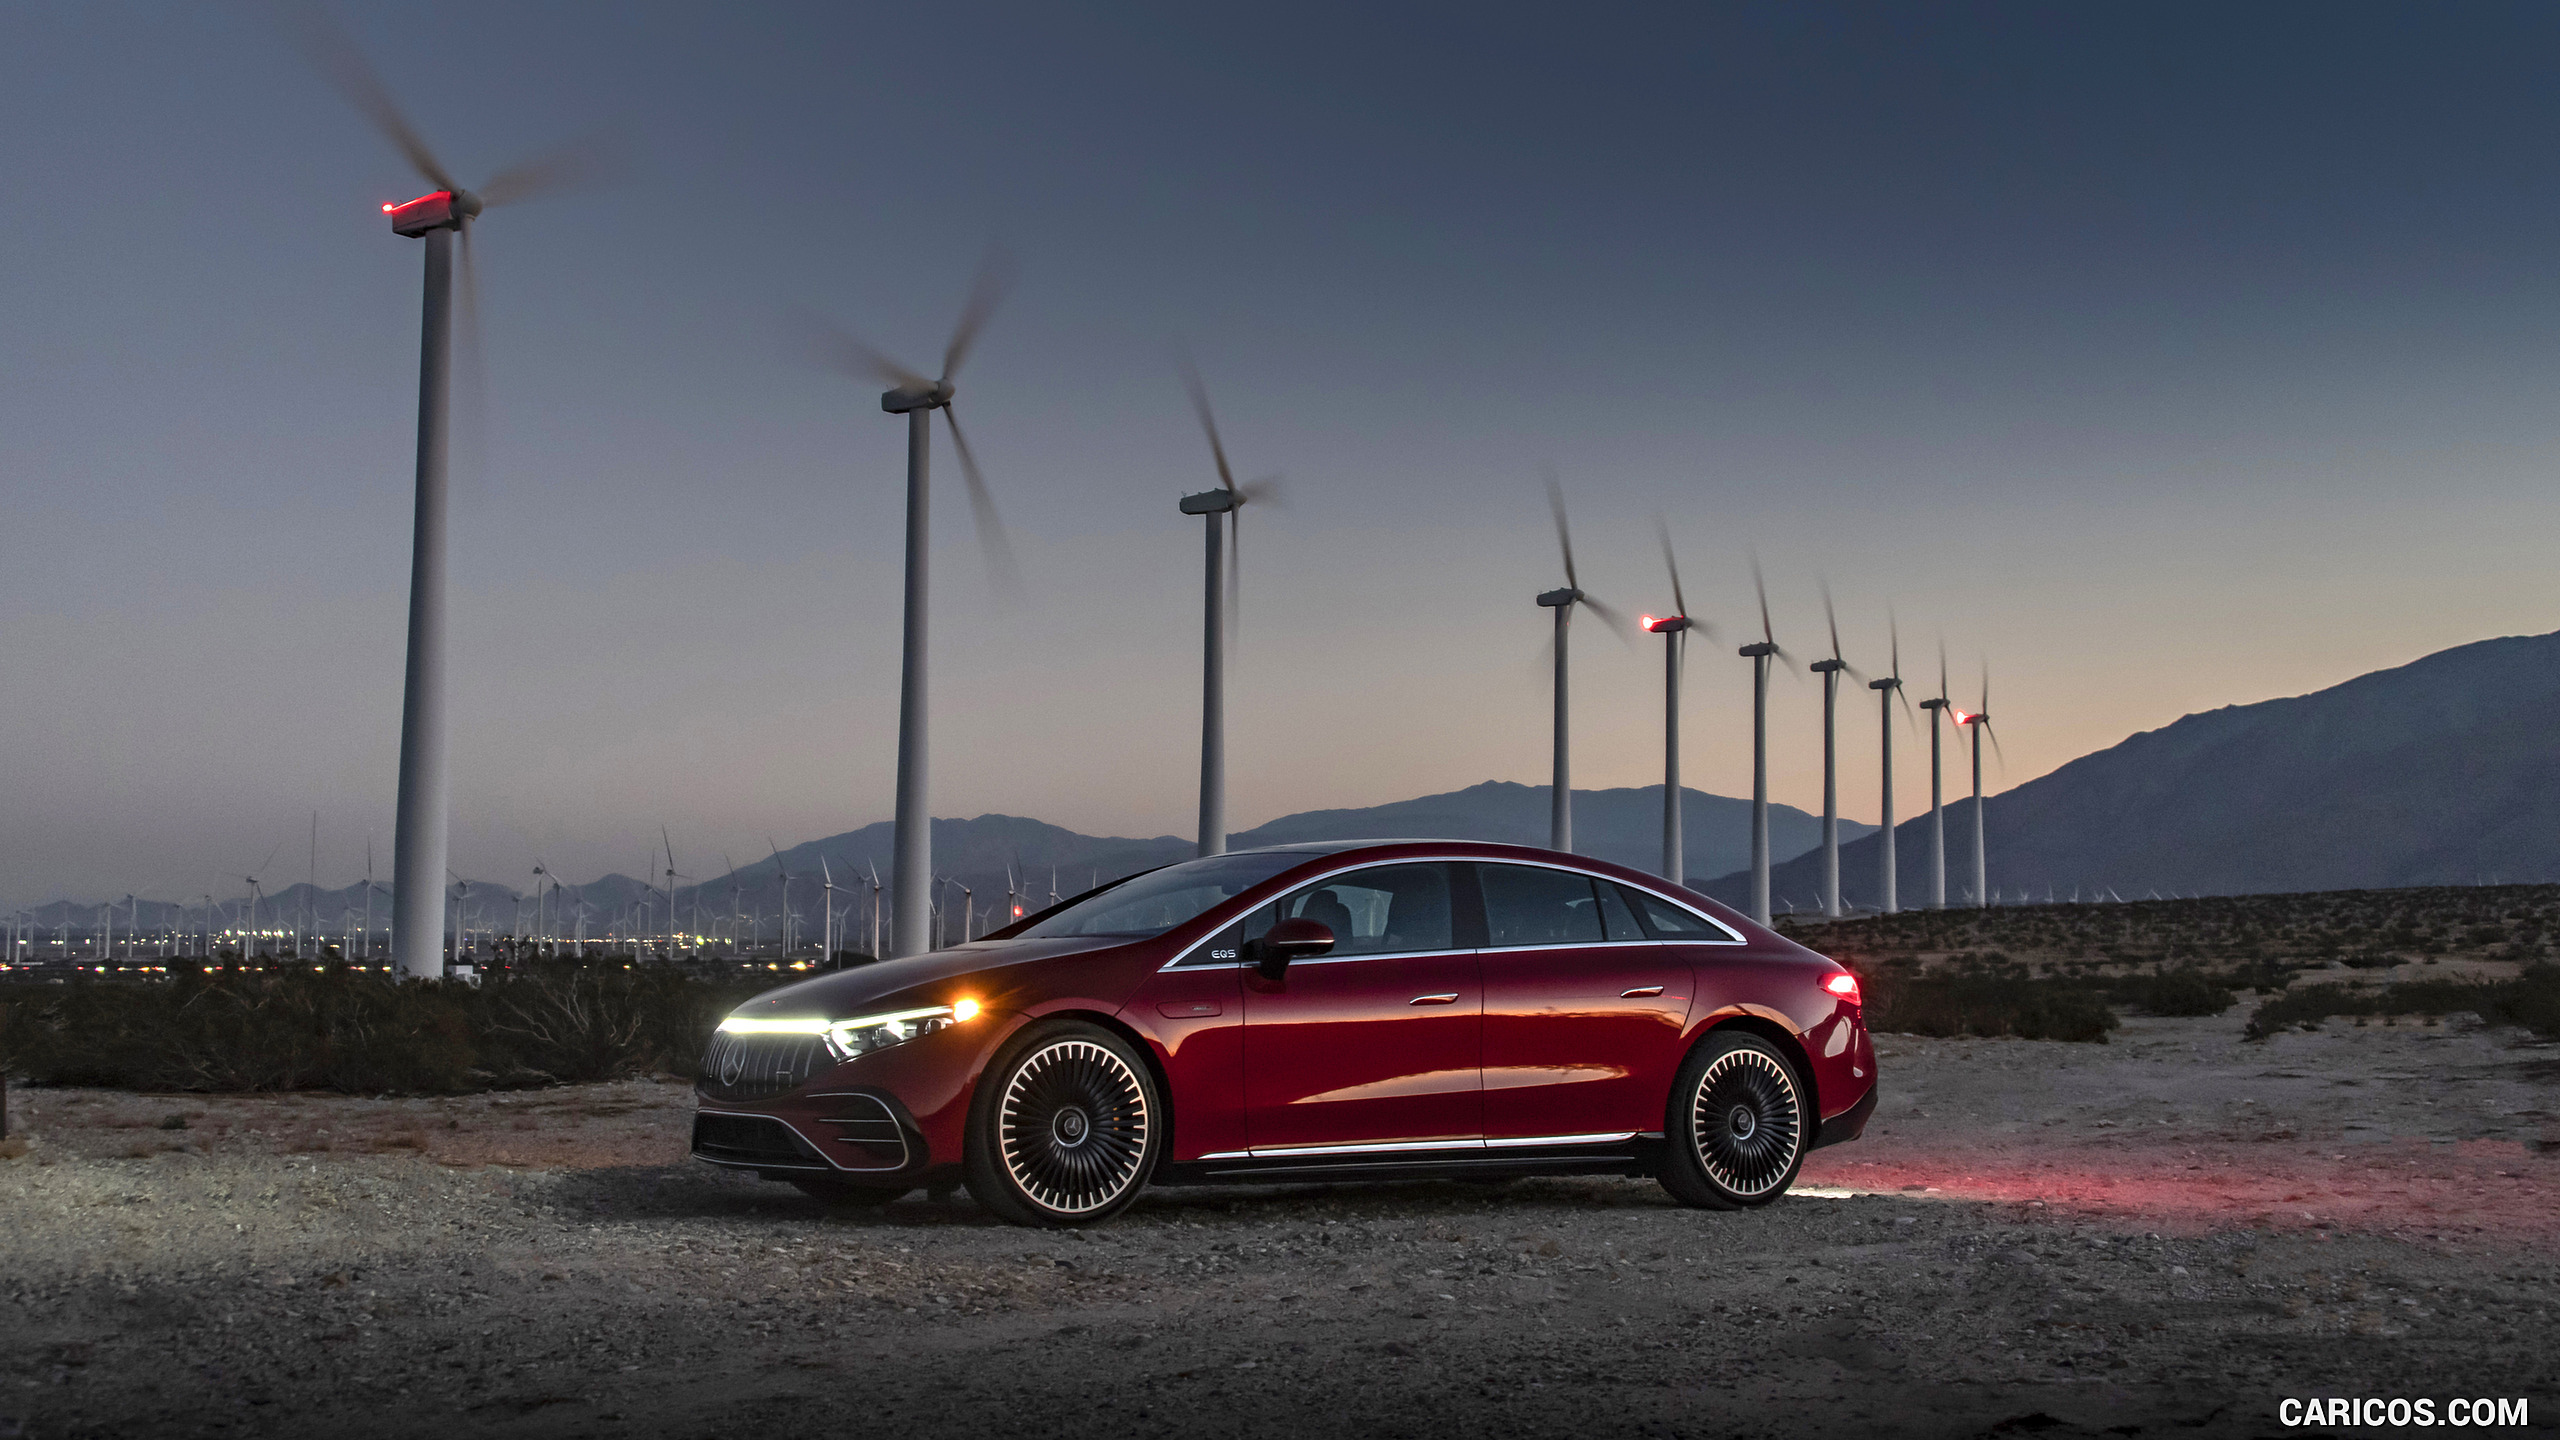 2022 Mercedes-AMG EQS 53 4MATIC+ (Color: Hyazinth Red Metallic) - Side, #44 of 76